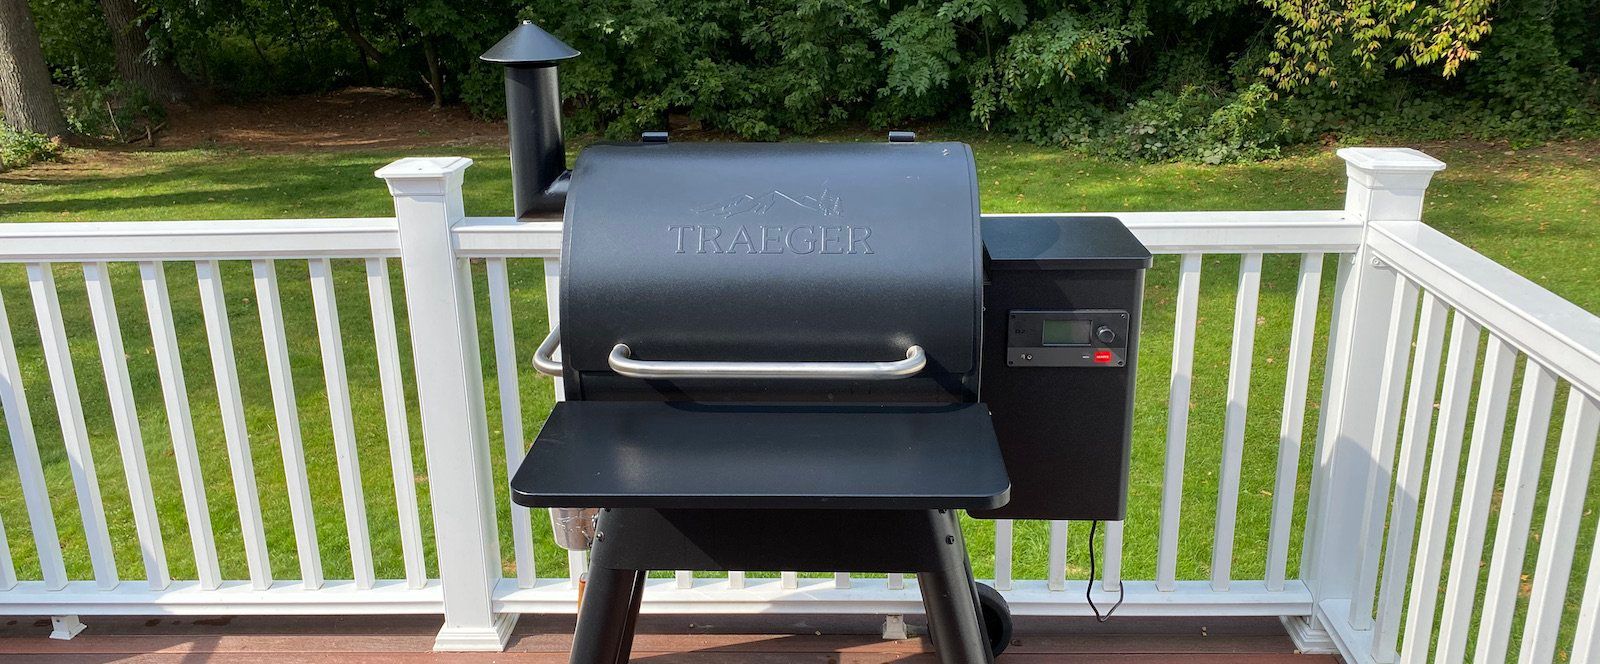 Traeger Pro 575 Review: Can The WiFi Smoker Replace Your Propane?